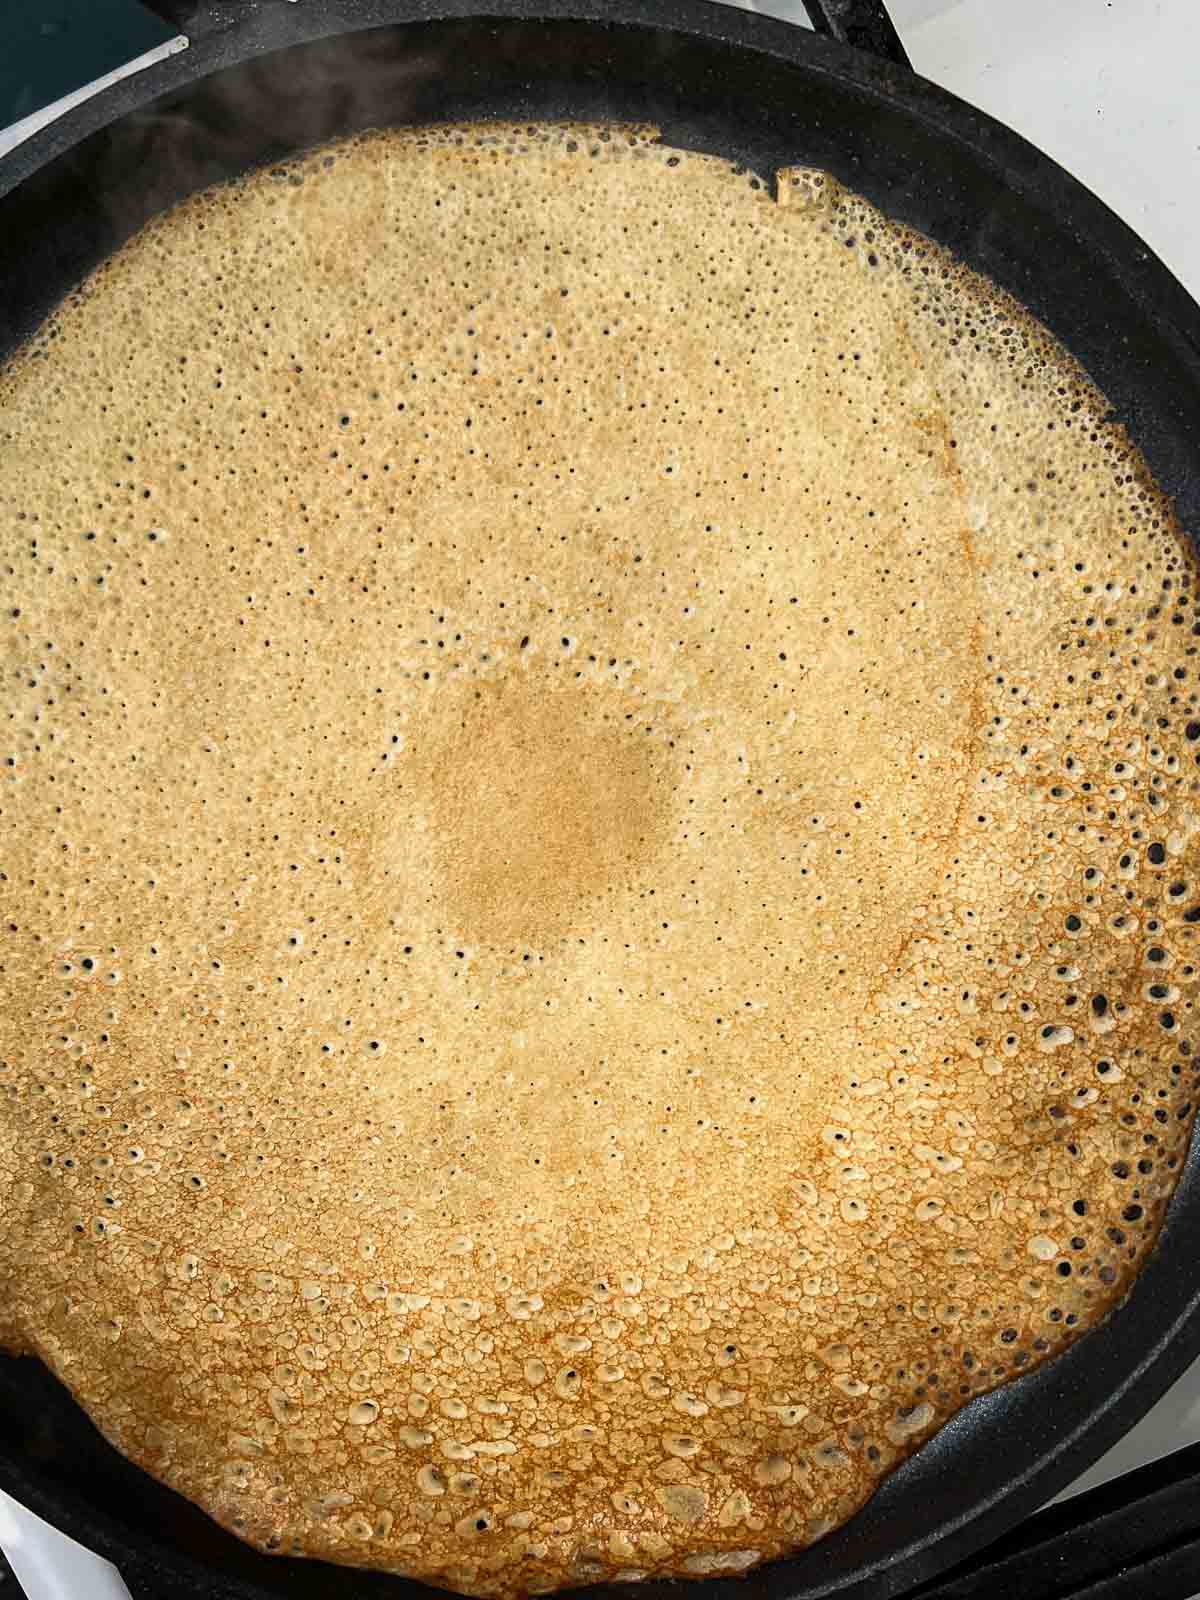 Crepe cooking in a pan